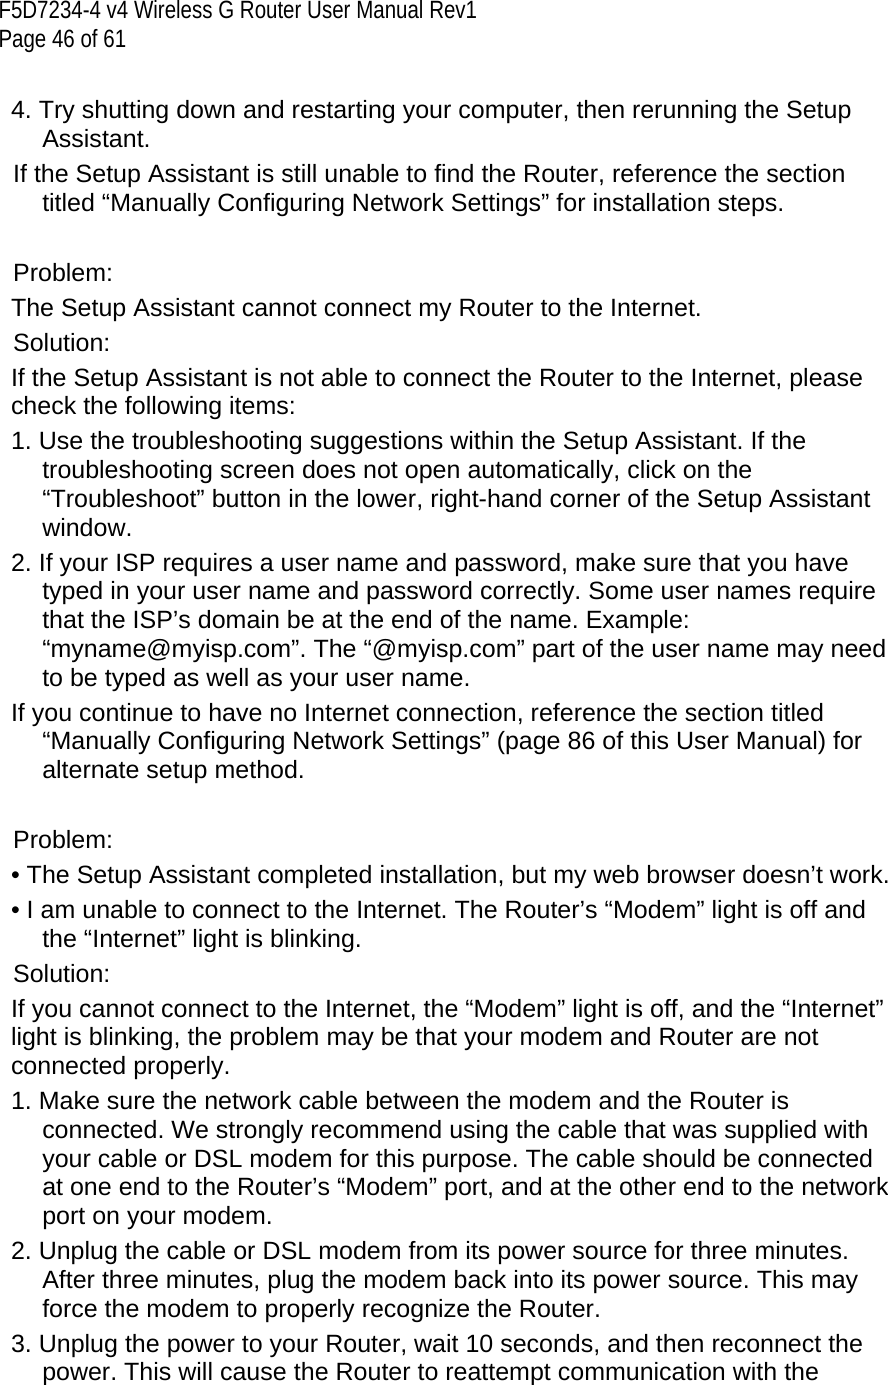 F5D7234-4 v4 Wireless G Router User Manual Rev1  Page 46 of 61   4. Try shutting down and restarting your computer, then rerunning the Setup Assistant.  If the Setup Assistant is still unable to find the Router, reference the section titled “Manually Configuring Network Settings” for installation steps.   Problem: The Setup Assistant cannot connect my Router to the Internet.  Solution: If the Setup Assistant is not able to connect the Router to the Internet, please check the following items: 1. Use the troubleshooting suggestions within the Setup Assistant. If the troubleshooting screen does not open automatically, click on the “Troubleshoot” button in the lower, right-hand corner of the Setup Assistant window. 2. If your ISP requires a user name and password, make sure that you have typed in your user name and password correctly. Some user names require that the ISP’s domain be at the end of the name. Example: “myname@myisp.com”. The “@myisp.com” part of the user name may need to be typed as well as your user name.  If you continue to have no Internet connection, reference the section titled “Manually Configuring Network Settings” (page 86 of this User Manual) for alternate setup method.  Problem: • The Setup Assistant completed installation, but my web browser doesn’t work. • I am unable to connect to the Internet. The Router’s “Modem” light is off and the “Internet” light is blinking.  Solution: If you cannot connect to the Internet, the “Modem” light is off, and the “Internet” light is blinking, the problem may be that your modem and Router are not connected properly.  1. Make sure the network cable between the modem and the Router is connected. We strongly recommend using the cable that was supplied with your cable or DSL modem for this purpose. The cable should be connected at one end to the Router’s “Modem” port, and at the other end to the network port on your modem.  2. Unplug the cable or DSL modem from its power source for three minutes. After three minutes, plug the modem back into its power source. This may force the modem to properly recognize the Router. 3. Unplug the power to your Router, wait 10 seconds, and then reconnect the power. This will cause the Router to reattempt communication with the 